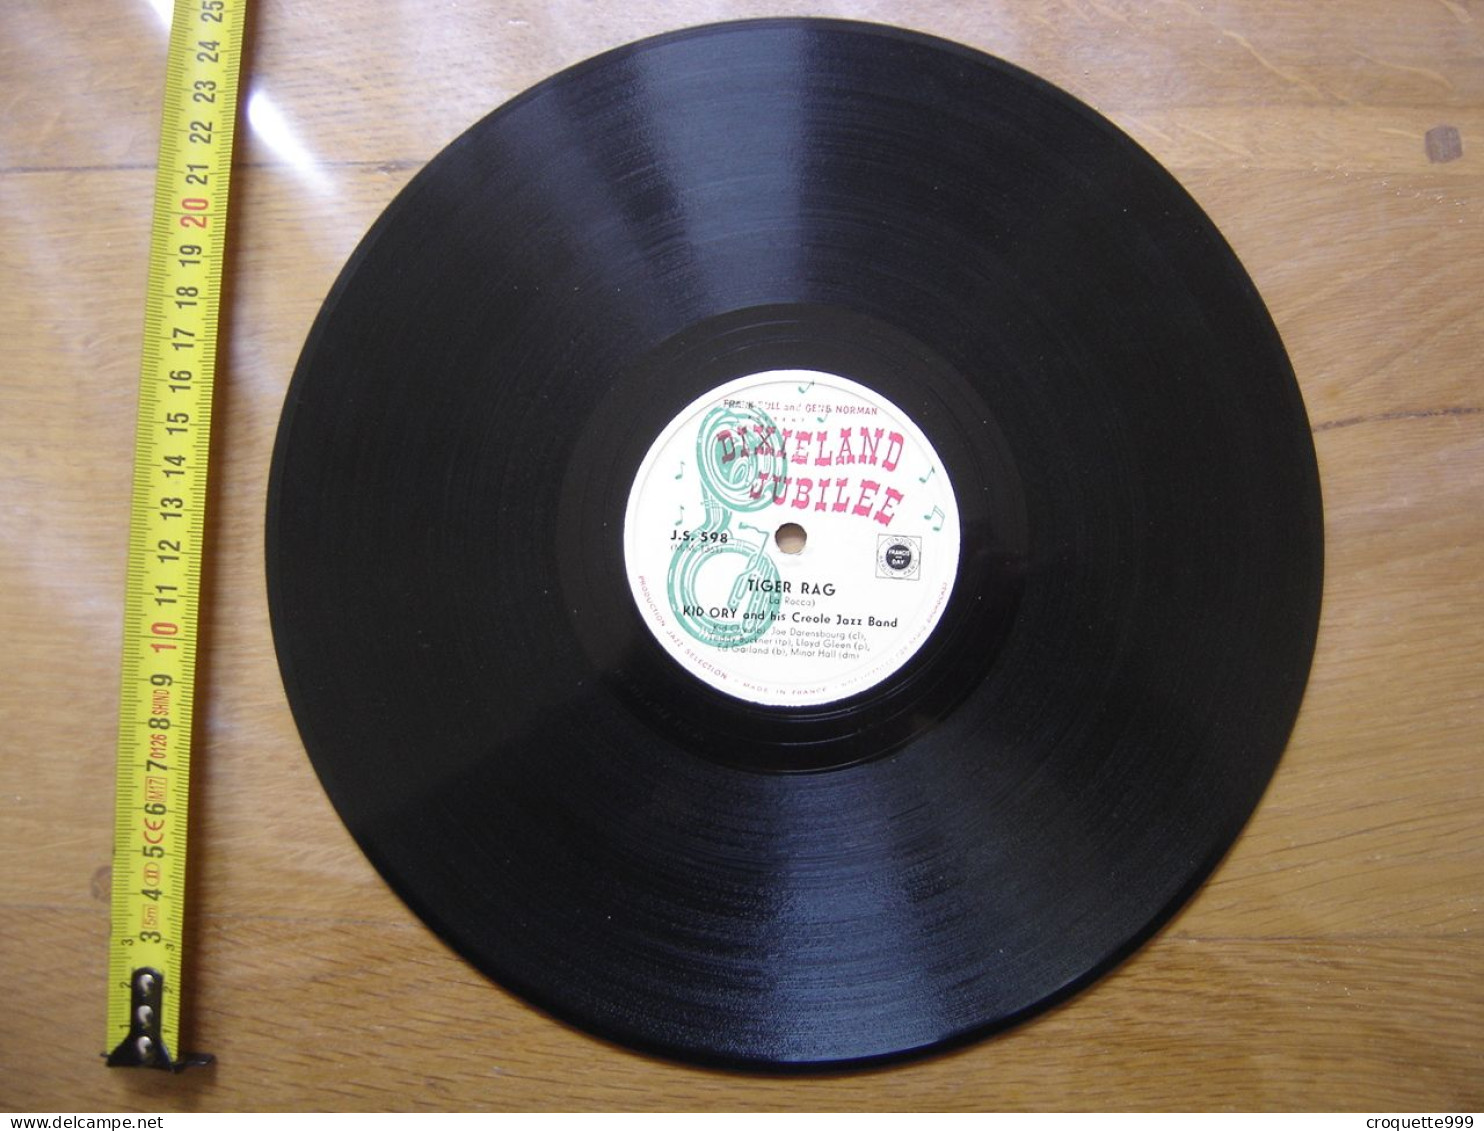 Disque 78 Tours 25 Cm KID ORY And His Creole Jazz Band Dixieland Jubilee J.S. 598 TIGER RAG EH LA BAS - 78 G - Dischi Per Fonografi